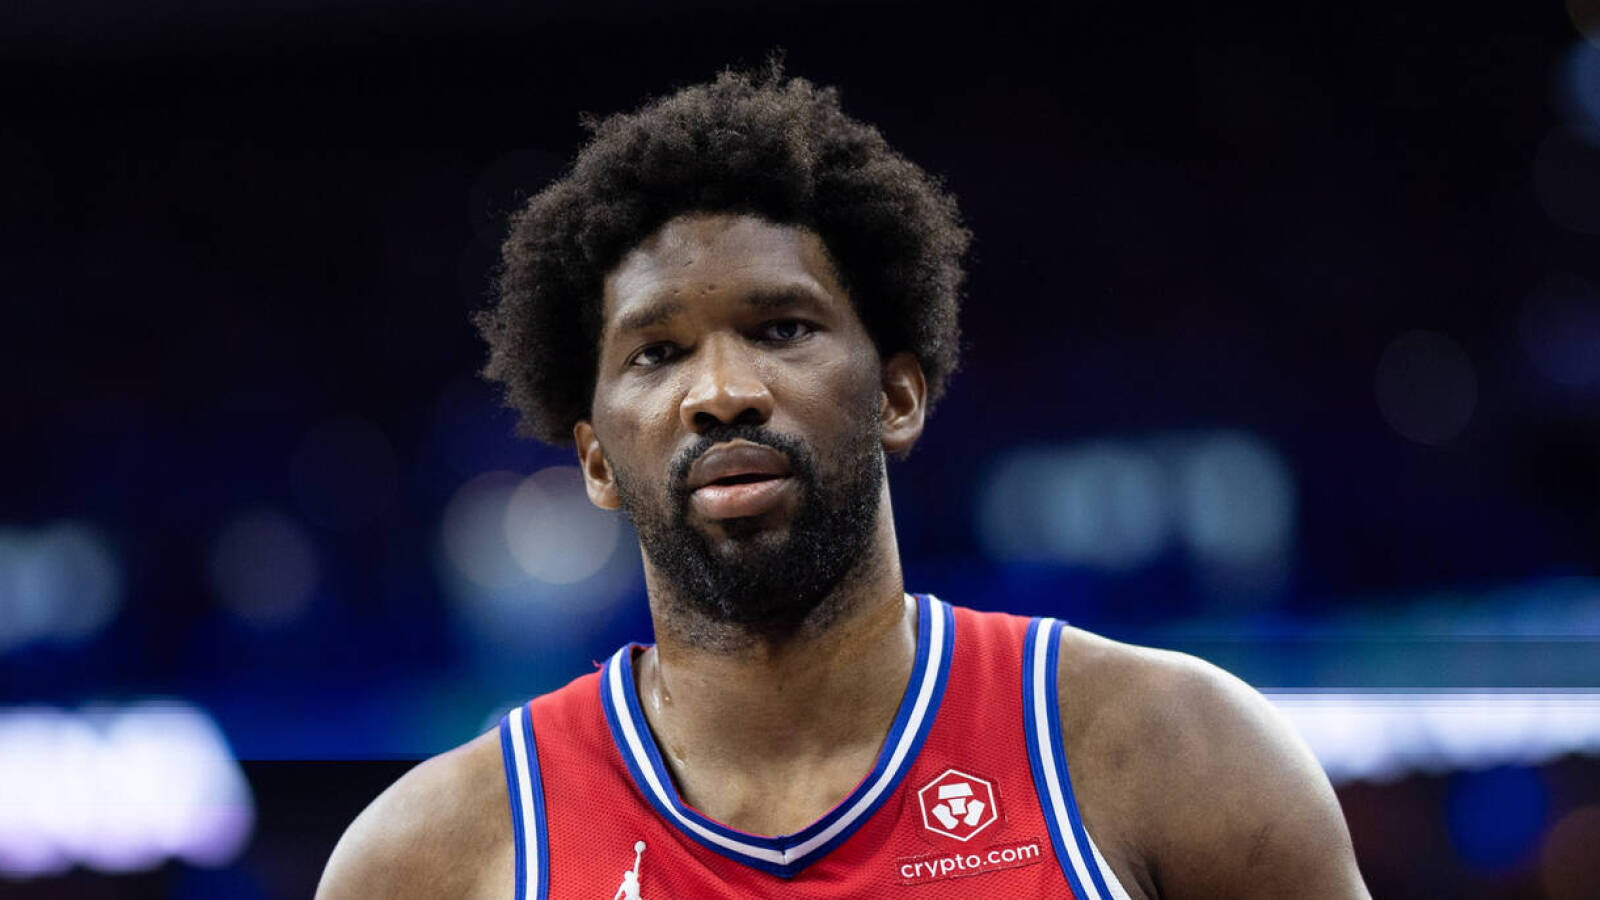 Joel Embiid 'disappointed' by Knicks fans taking over Sixers arena